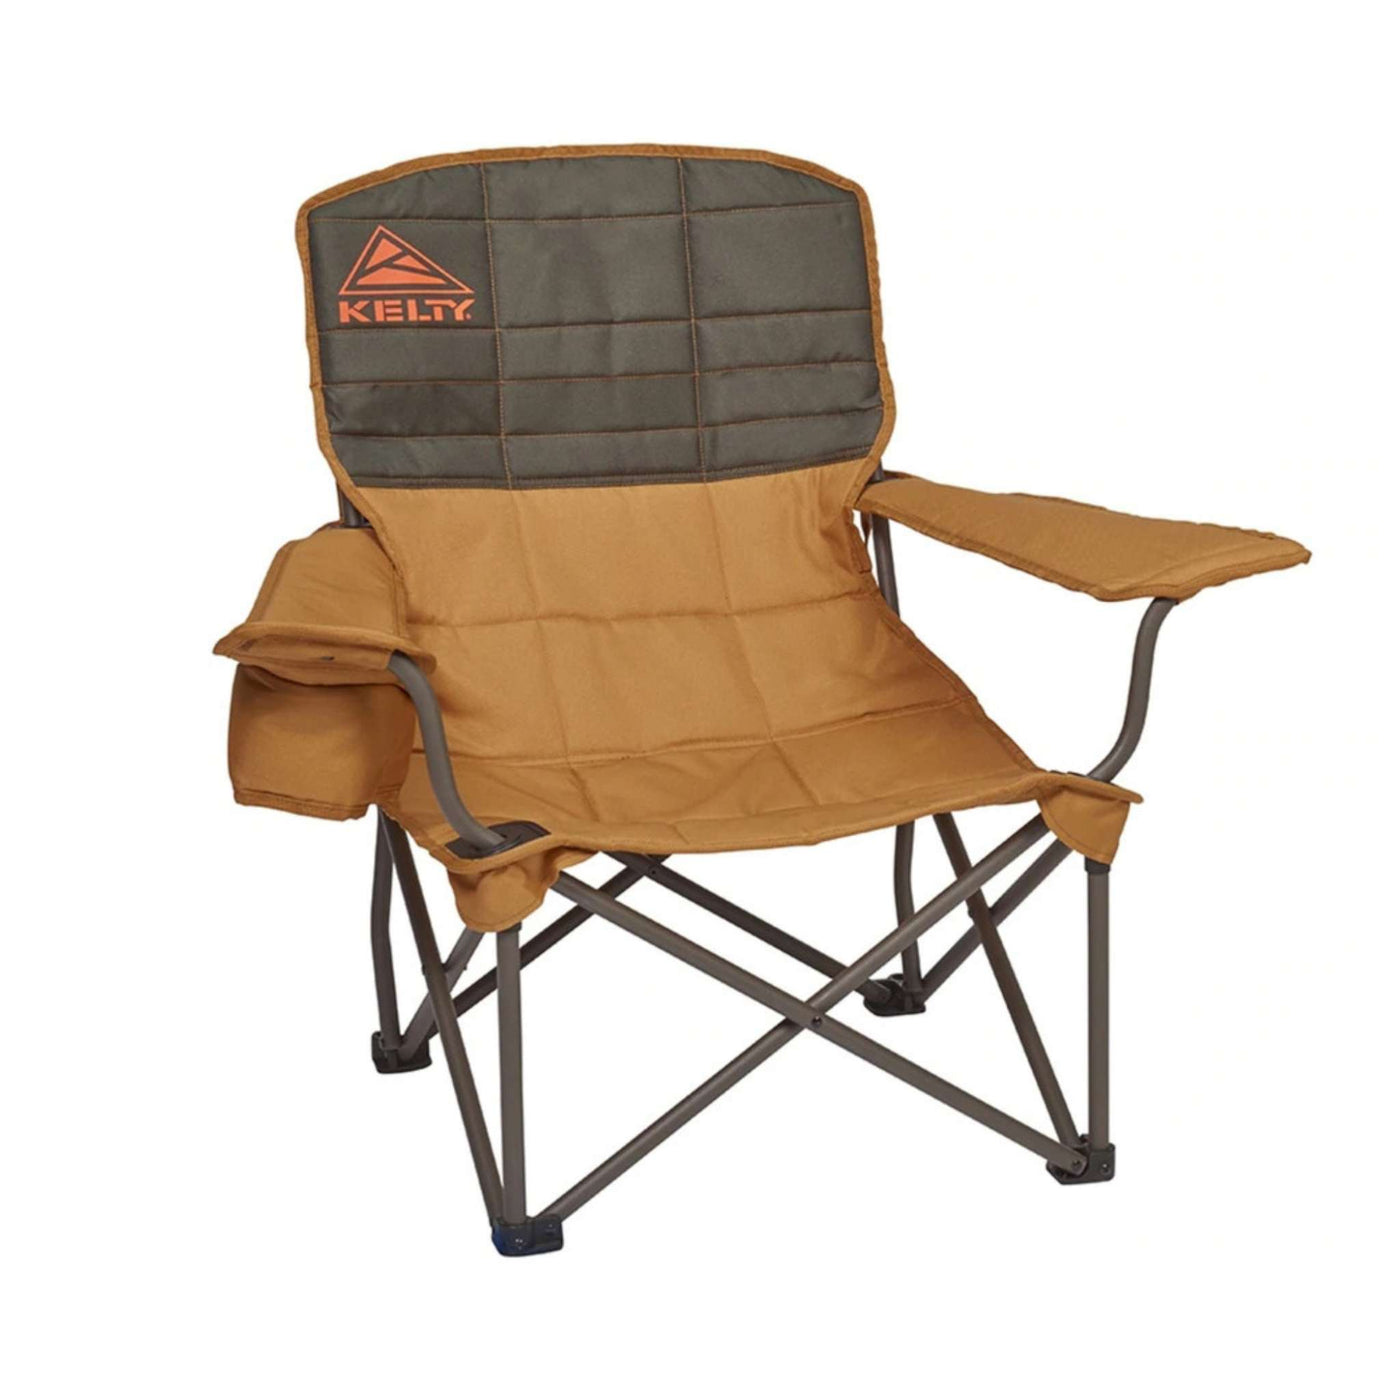 Kelty Lowdown Chair | Lightweight Camping and Outdoor Chair | Further Faster Christchurch NZ | #canyon-brown-beluga